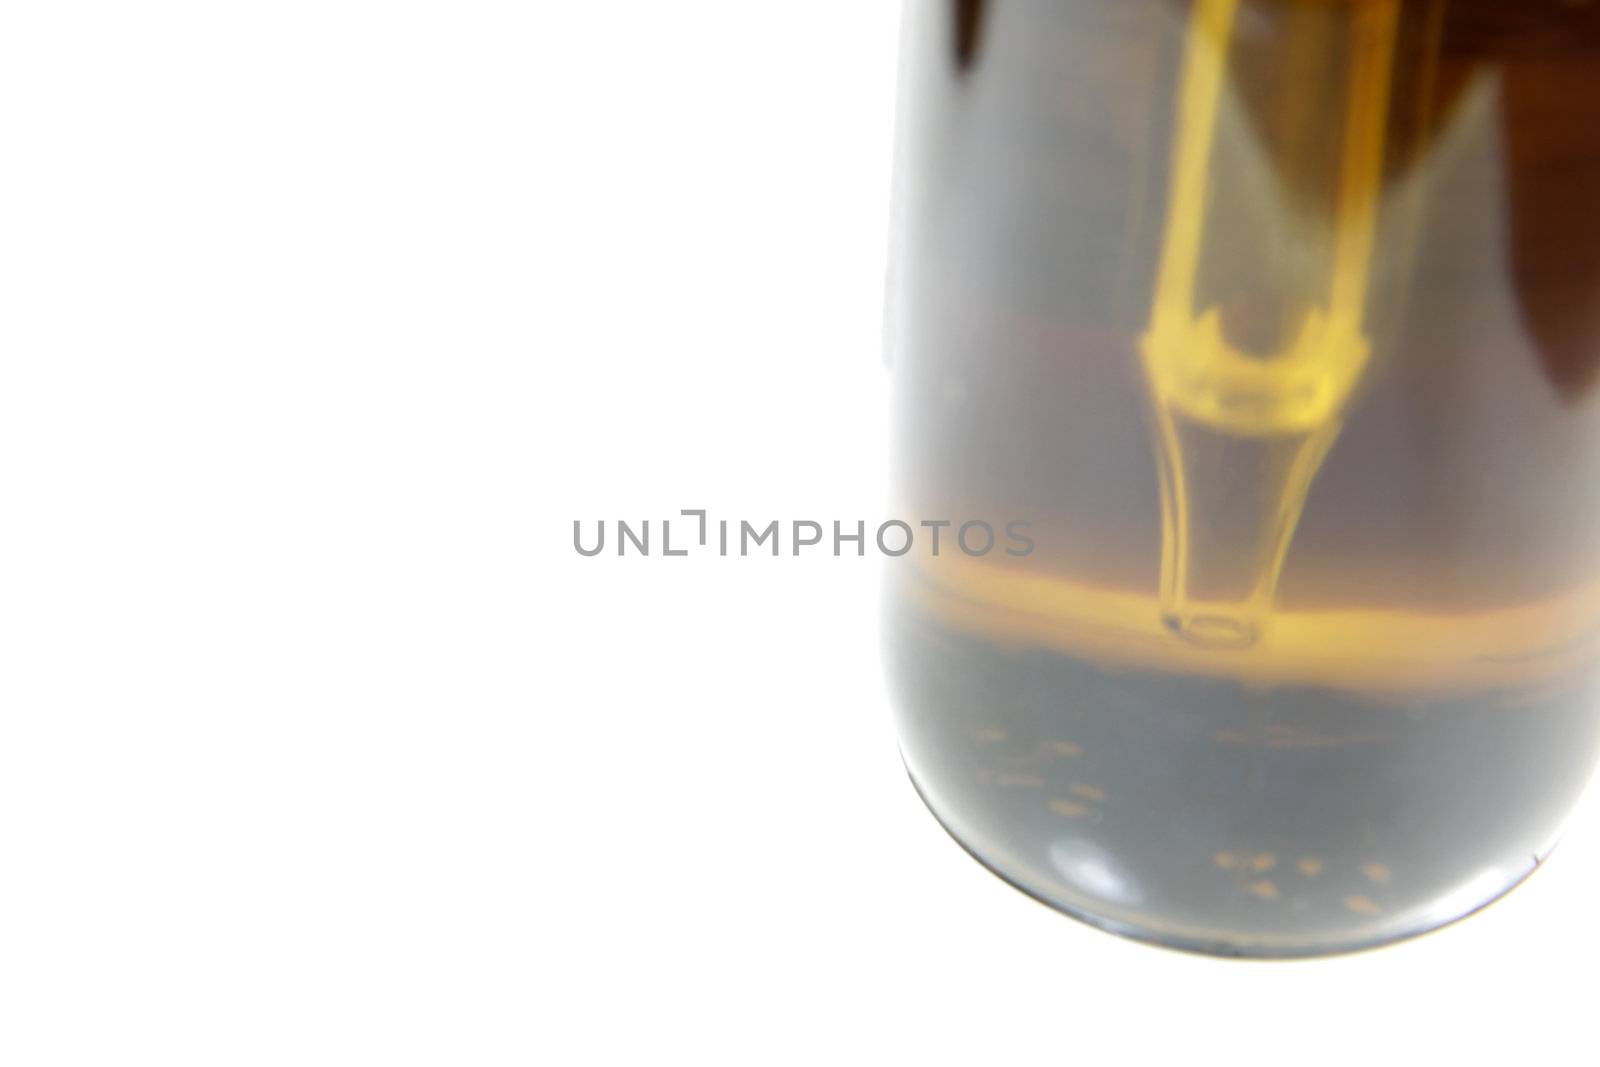 An extreme close-up of the dropper in a bottle containing naturopathic medicine, isolated on a white background.
